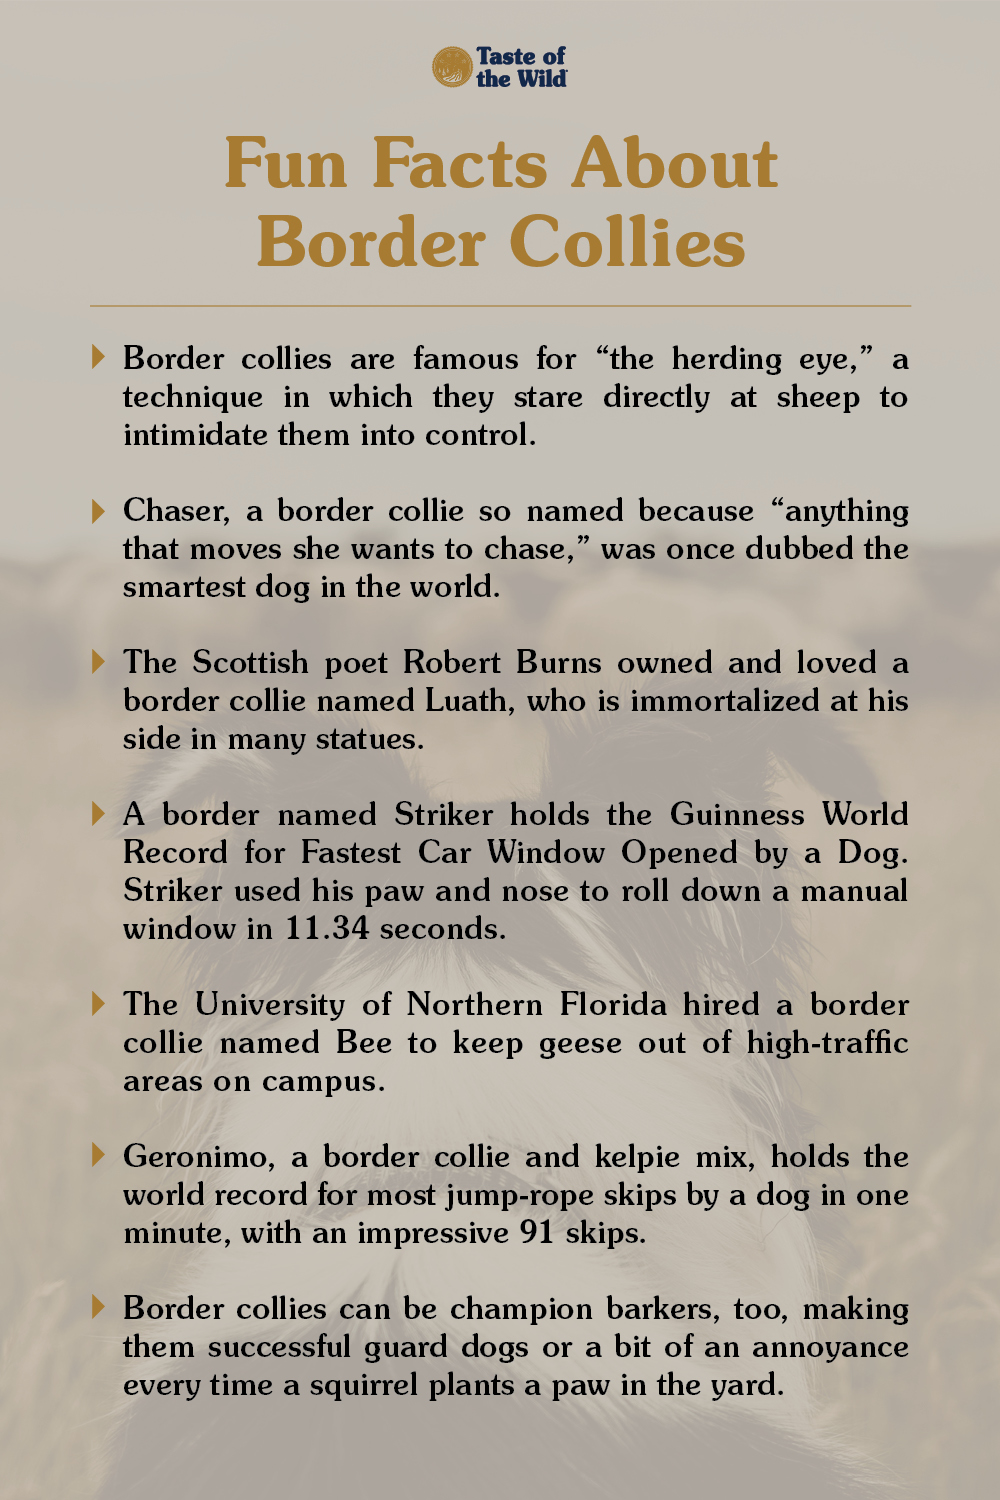 Fun Facts about Border Collies Infographic | Taste of the Wild